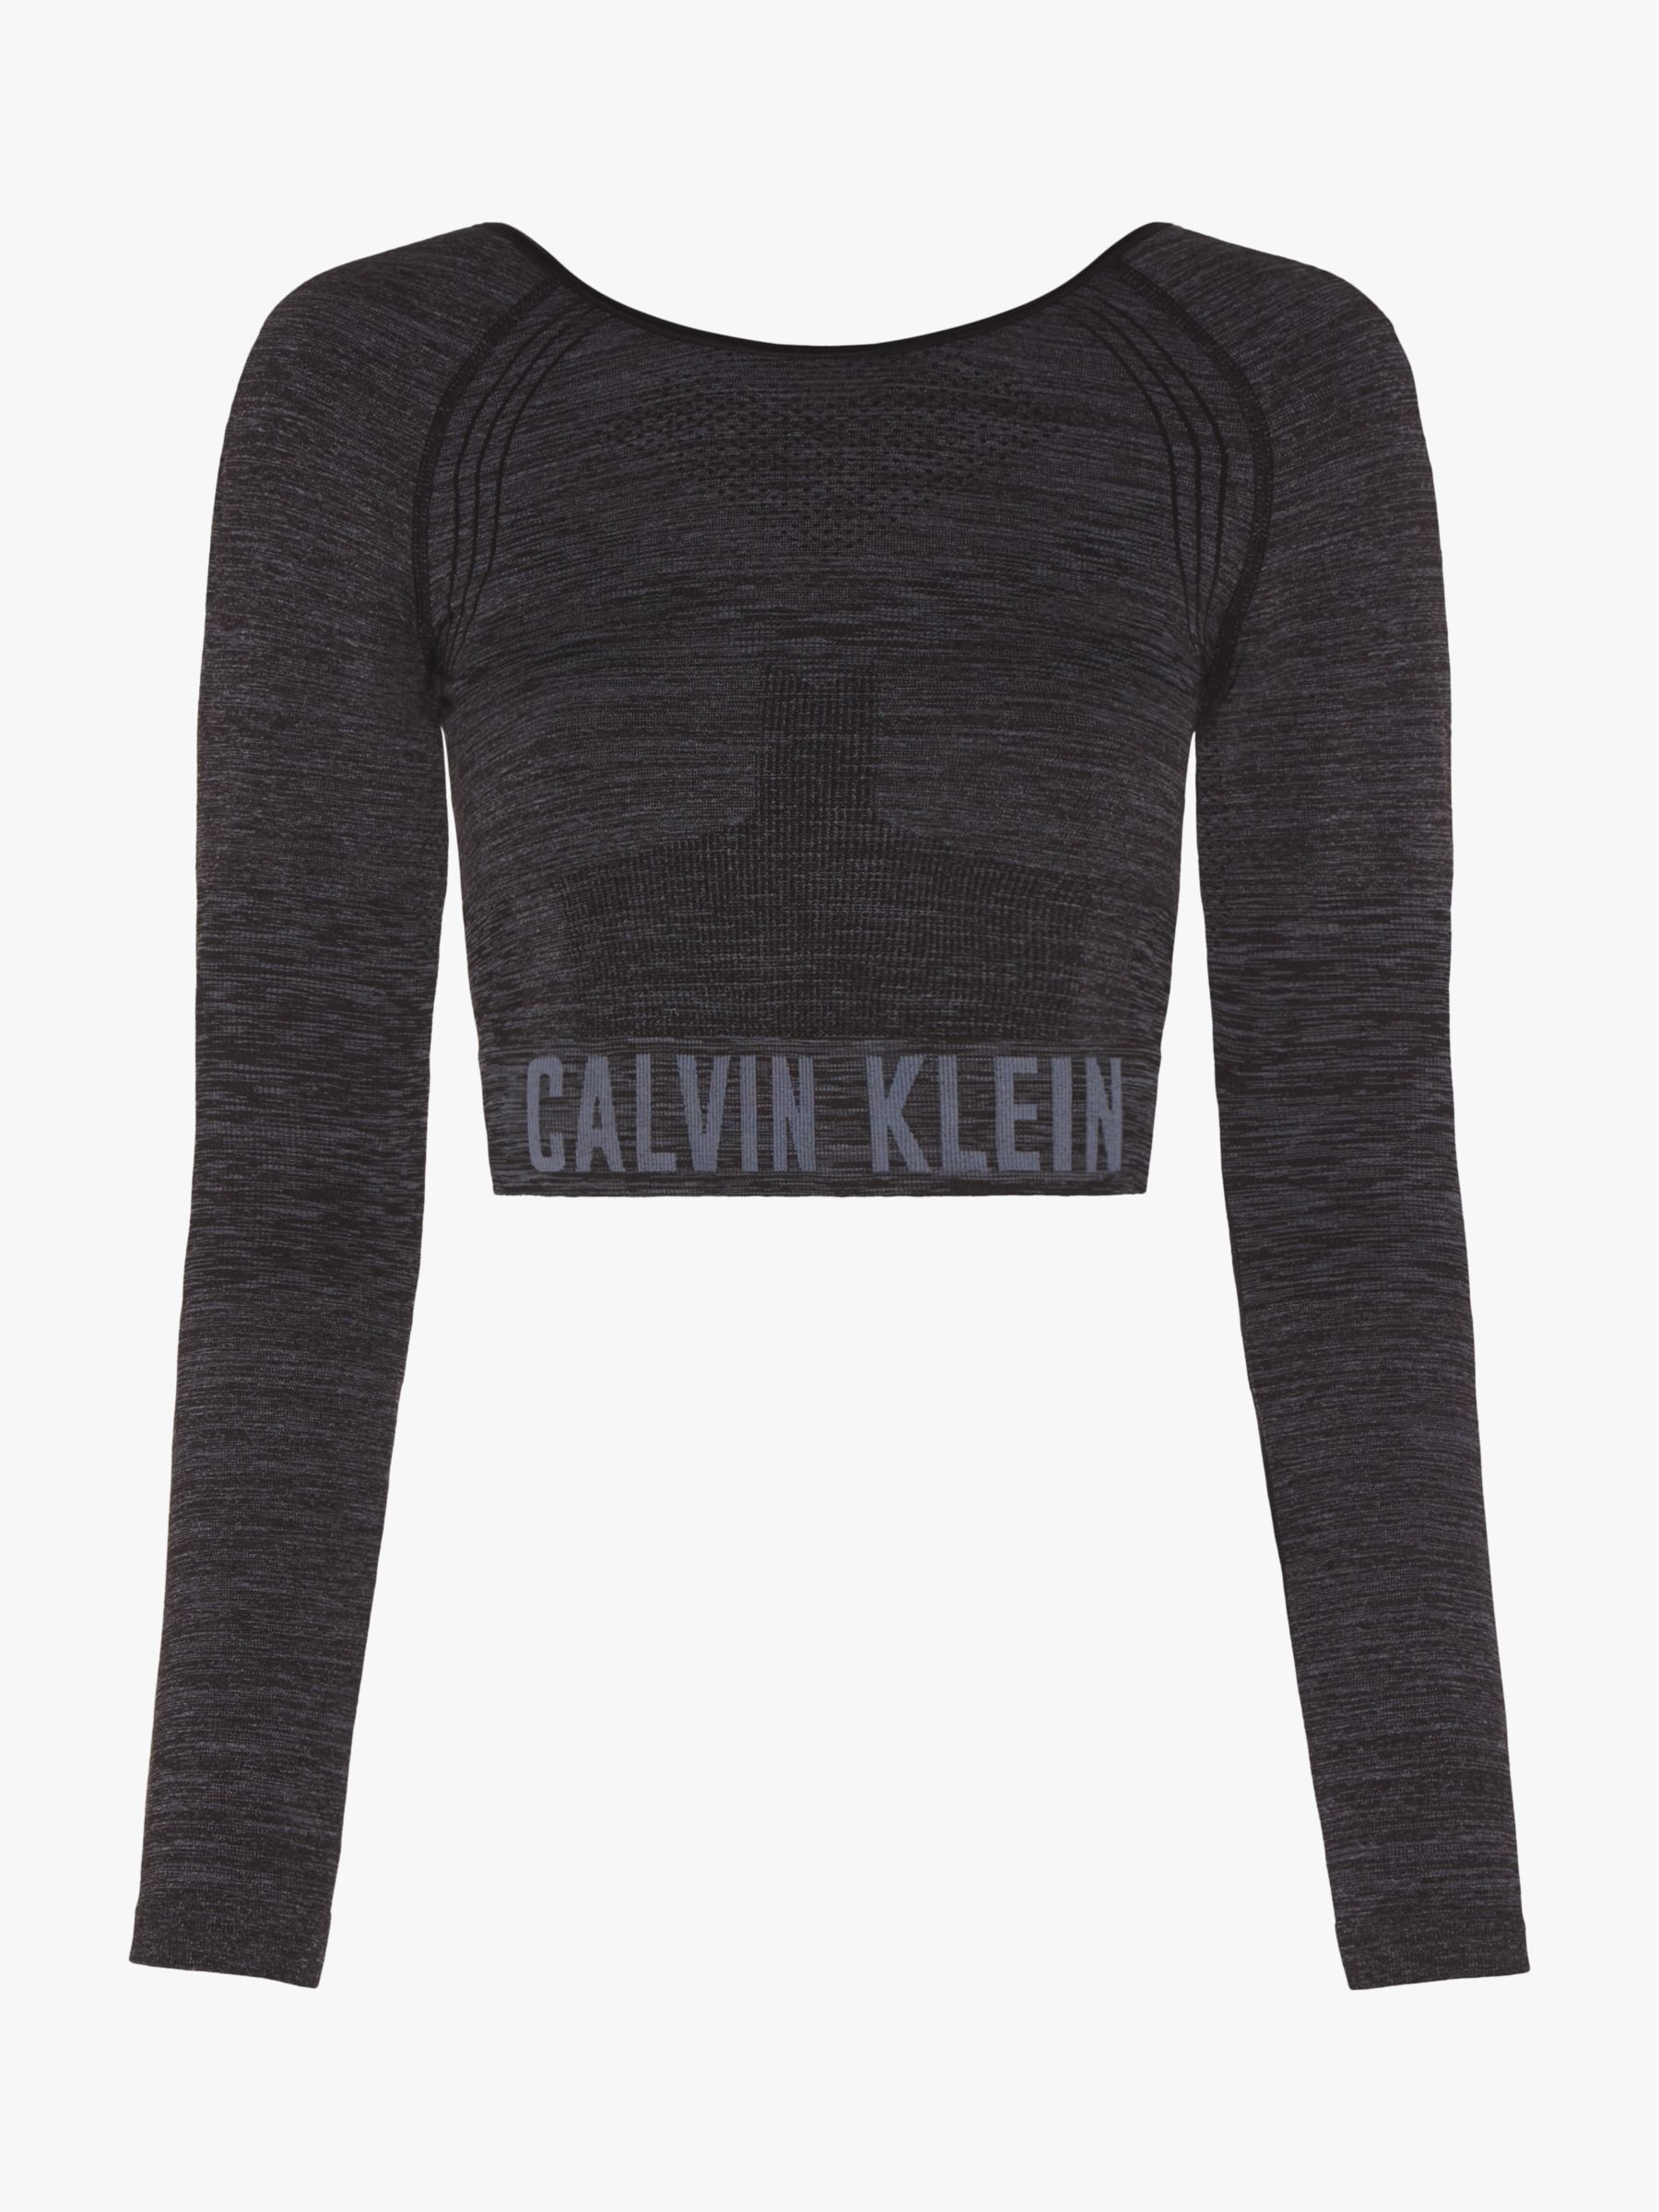 Calvin Klein Performance Long Sleeve Cropped Top, CK Black Heather at